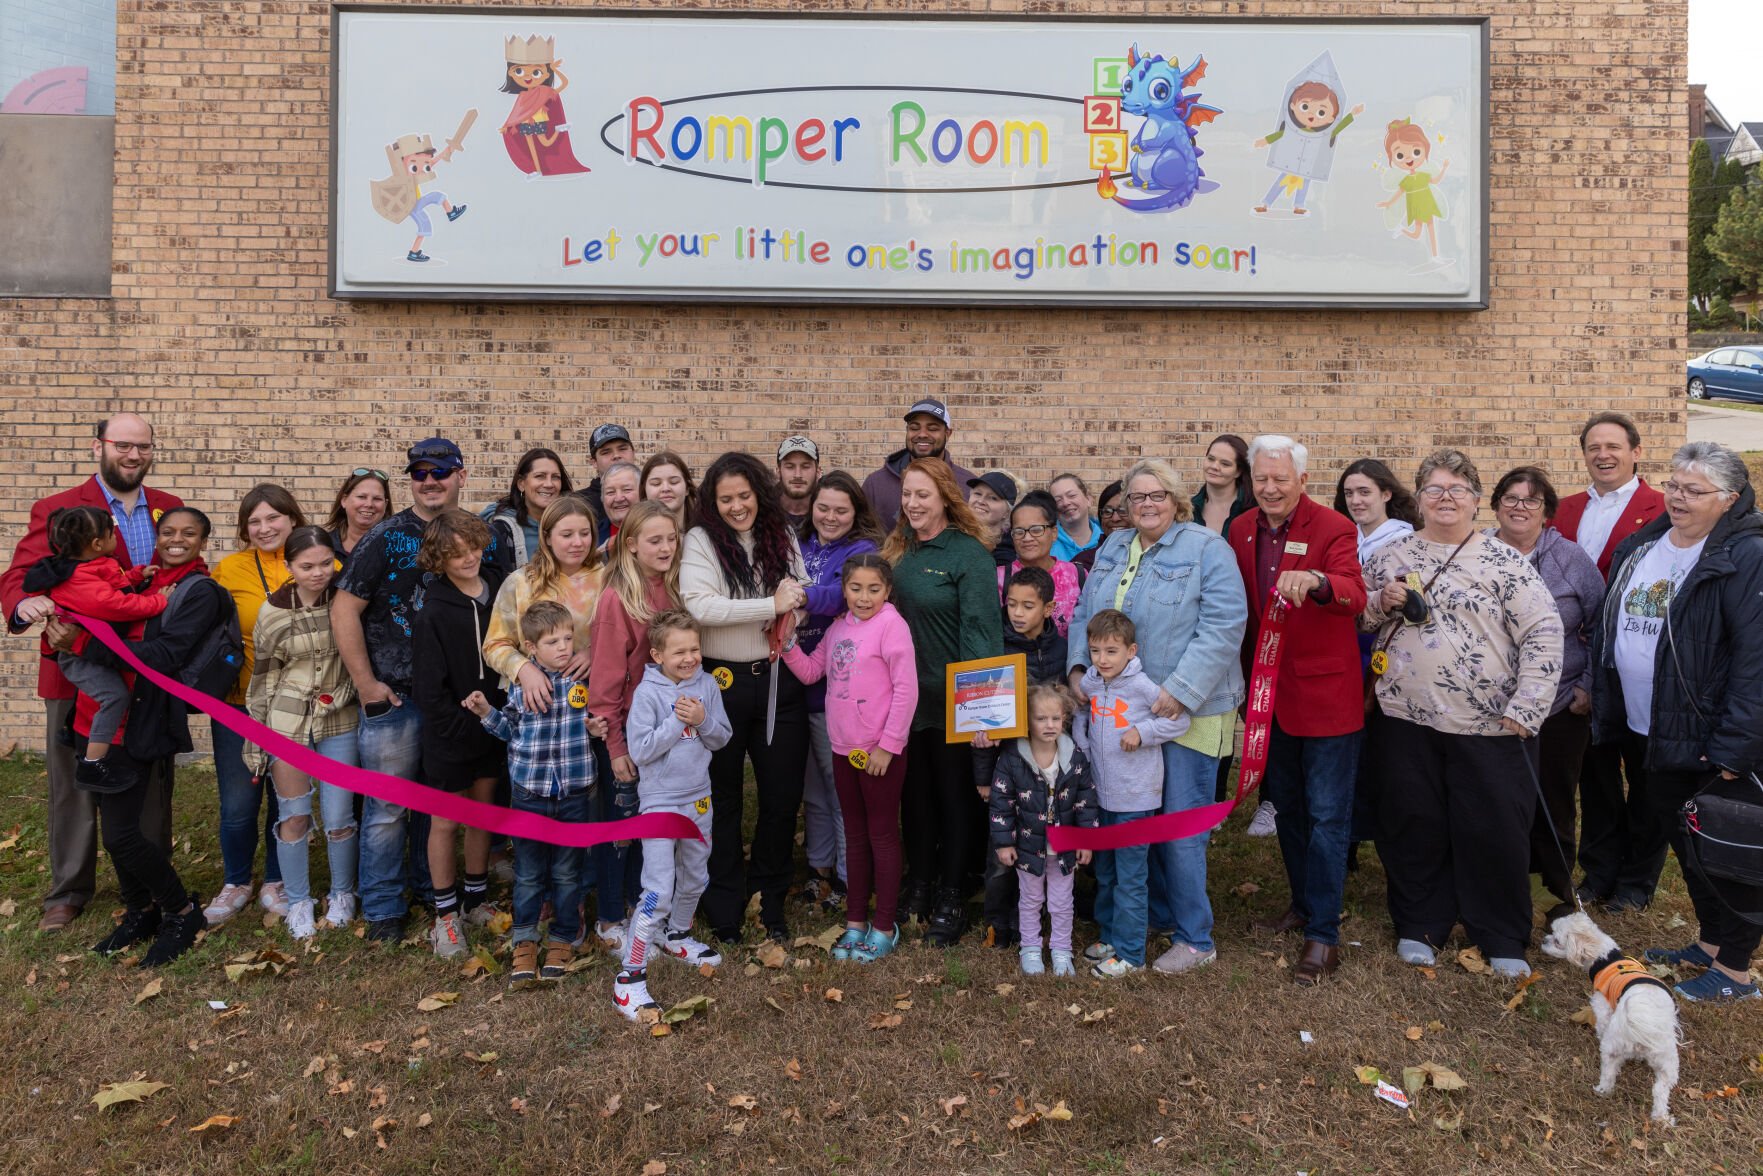 Romper Room Child Care Center, 1275 Main St., Dubuque.    PHOTO CREDIT: Dubuque Area Chamber of Commerce